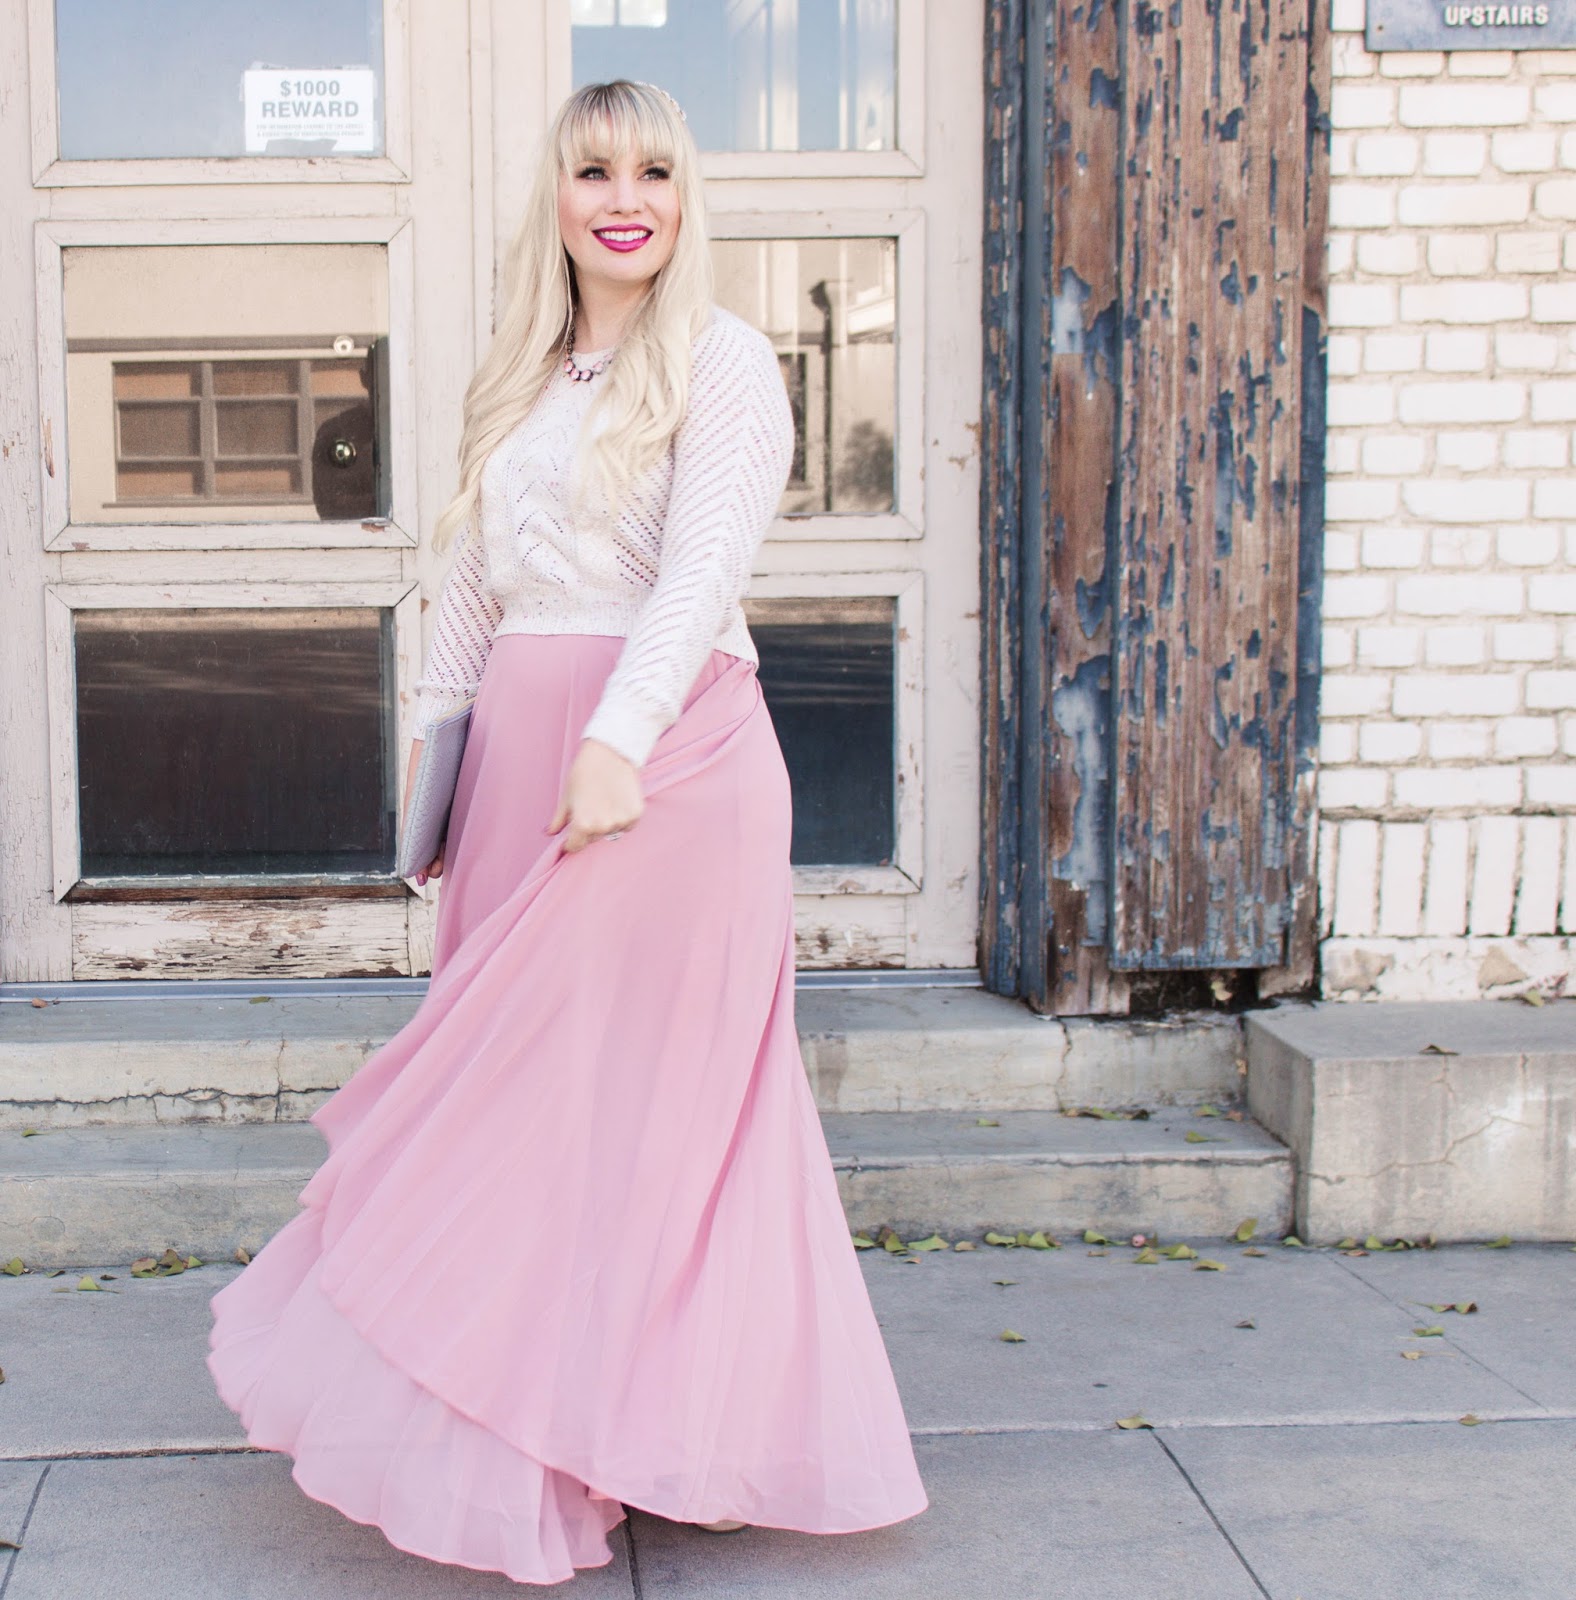 A Day in the Life of a Fashion Blogger by popular California fashion blogger Lizzie in Lace